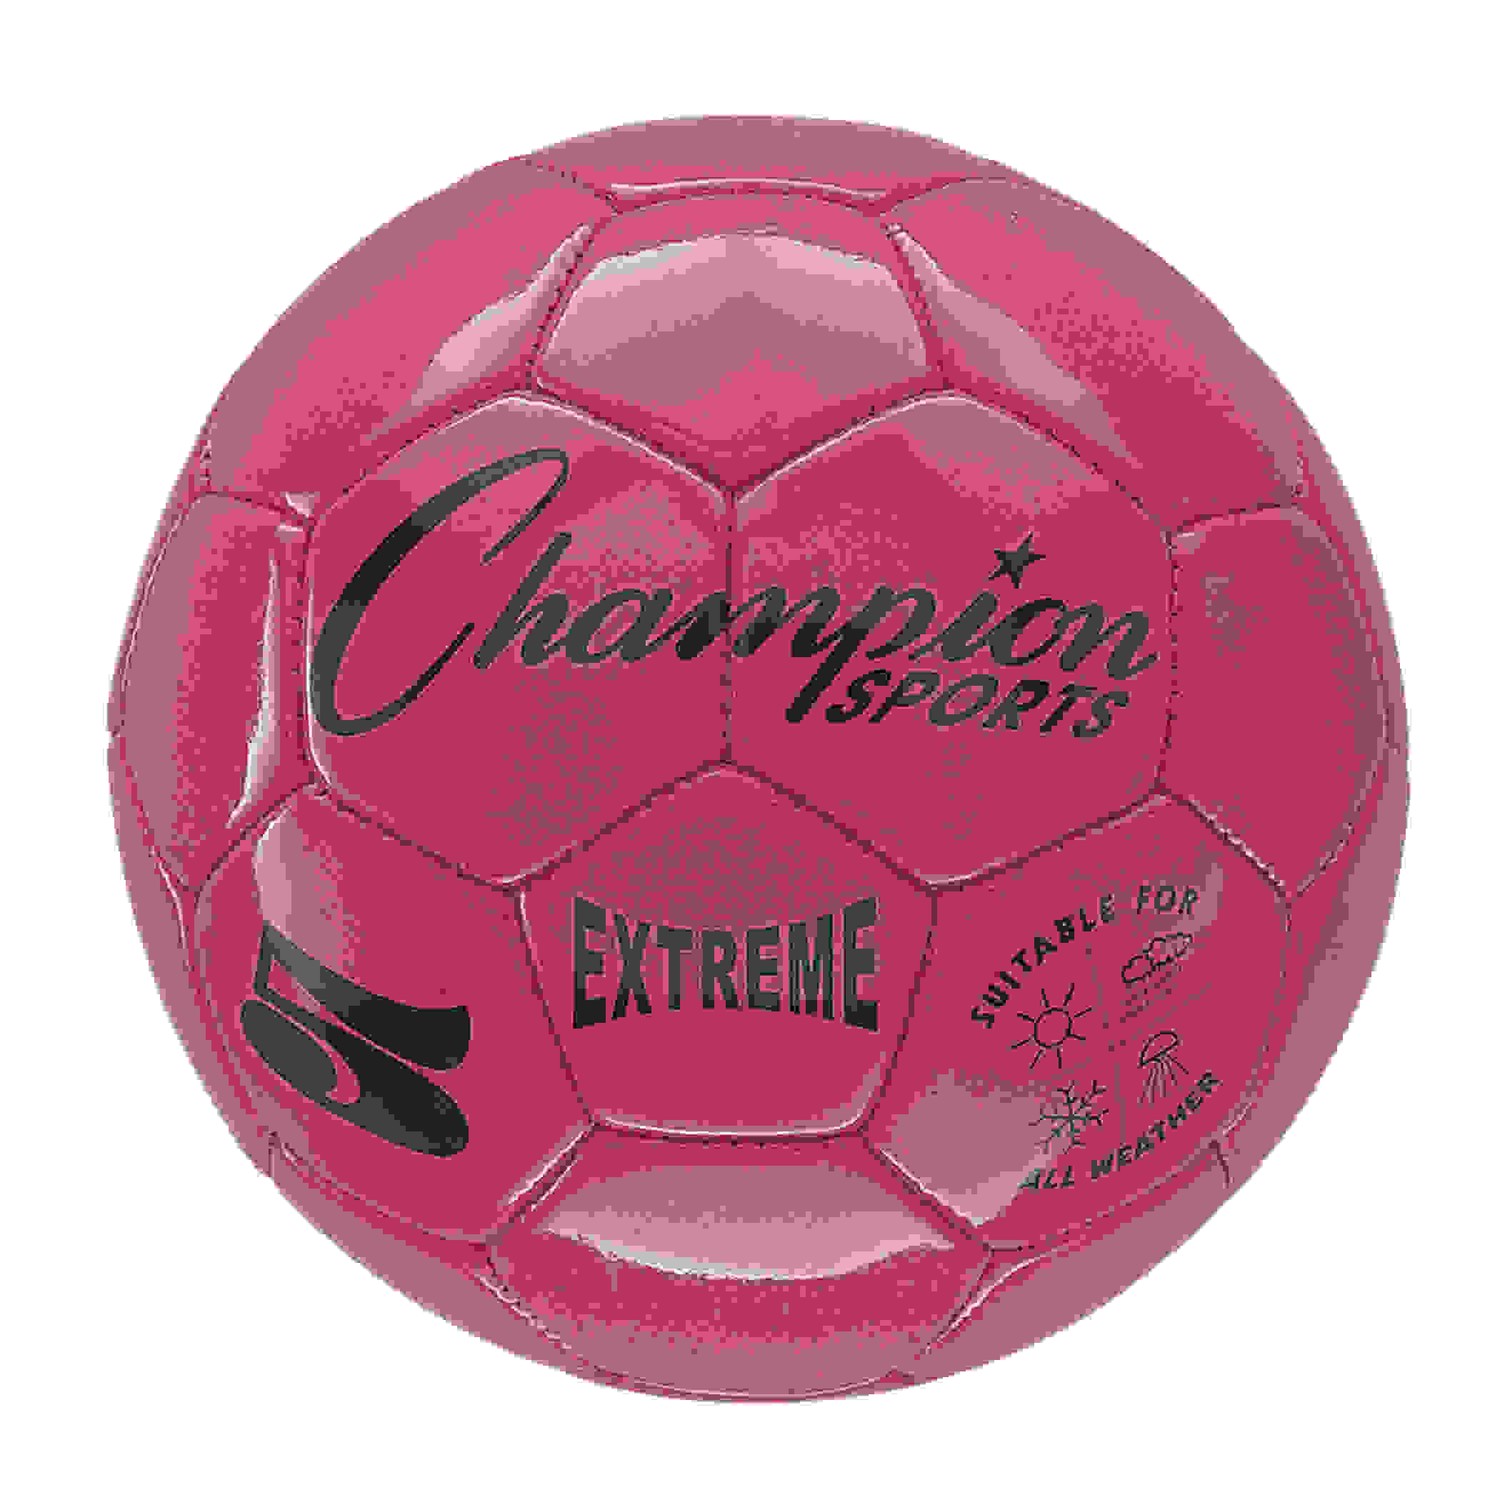 Extreme Soccer Ball, Size 5, Red